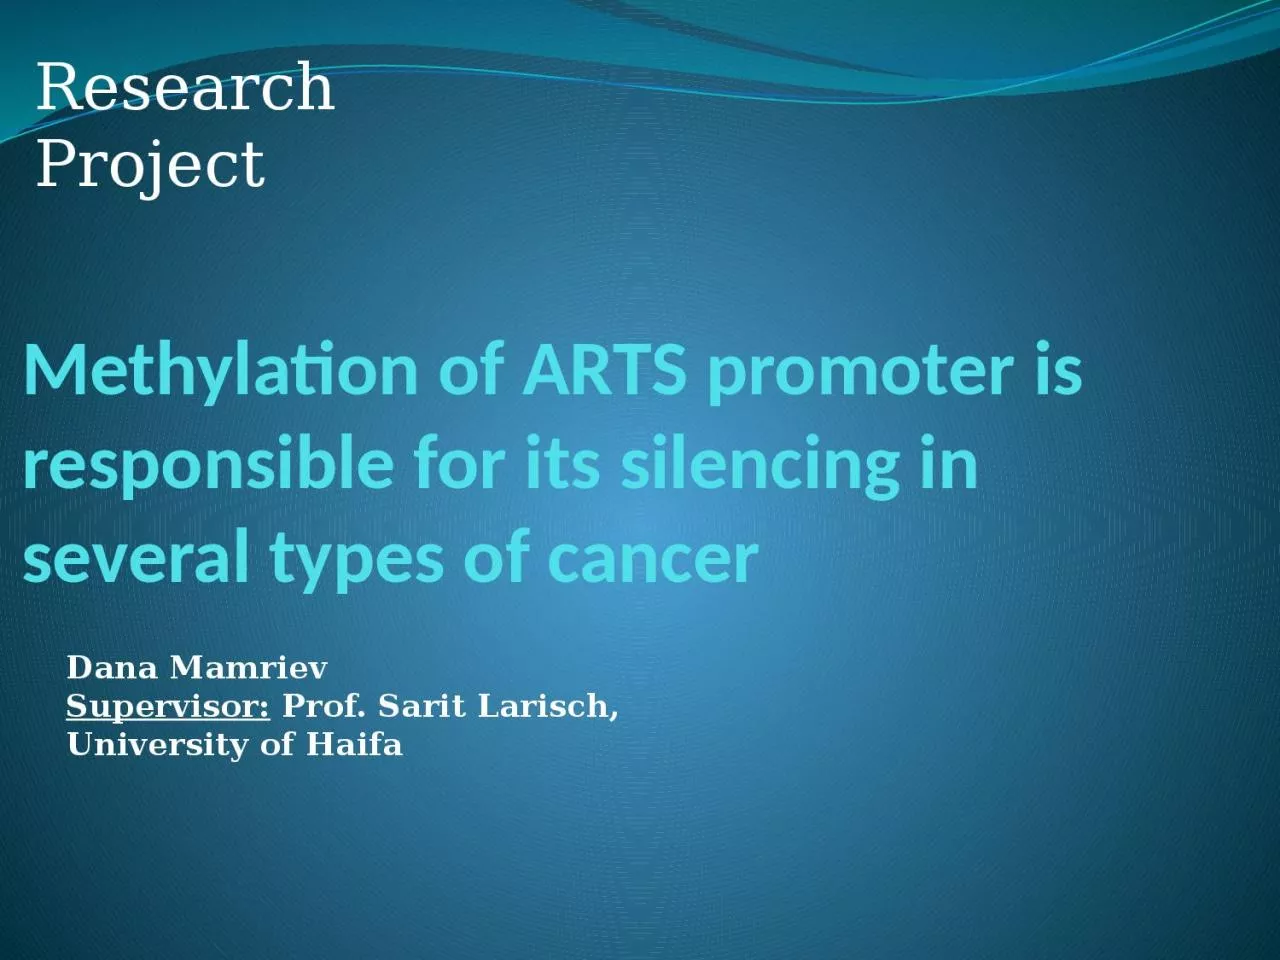 Methylation of ARTS promoter is responsible for its silencing in several types of cancer